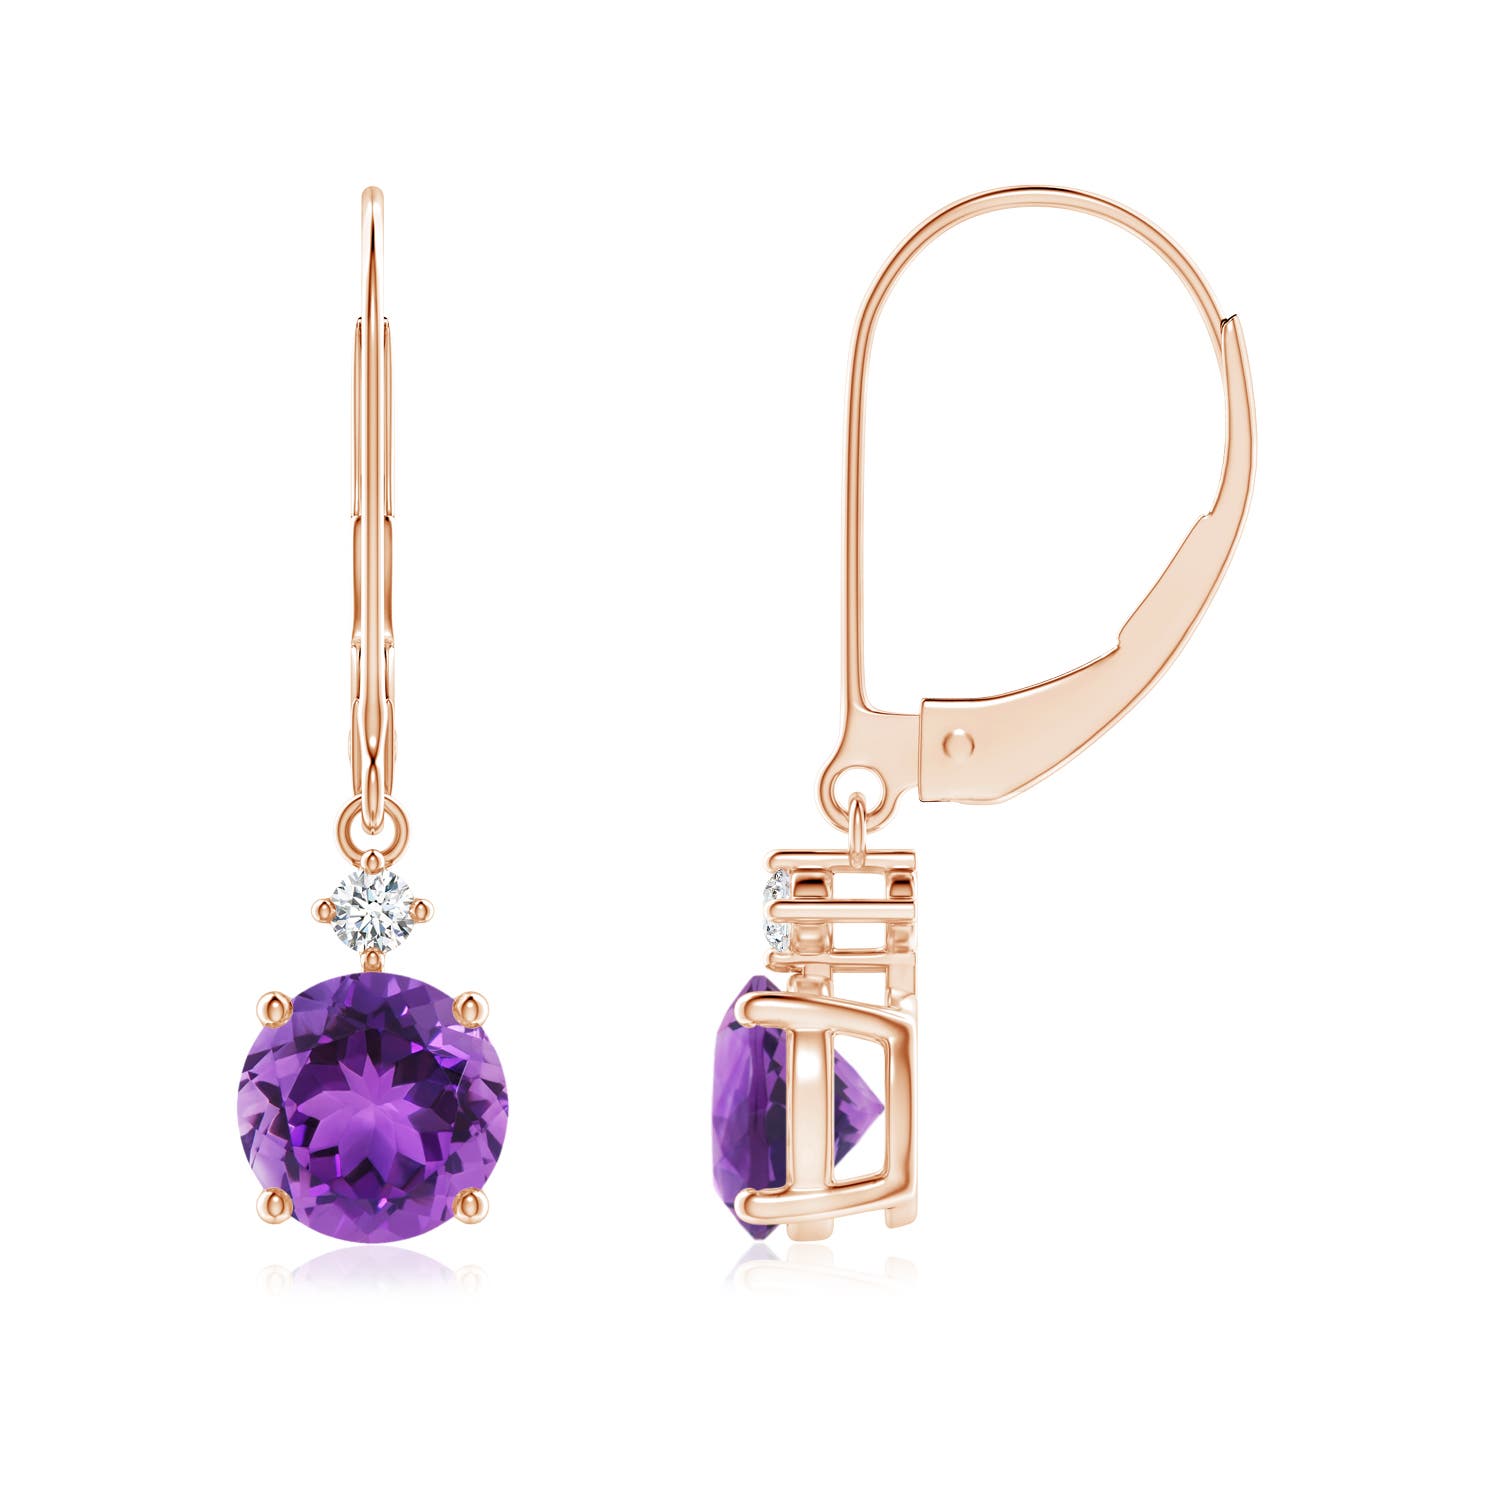 AAA - Amethyst / 1.65 CT / 14 KT Rose Gold